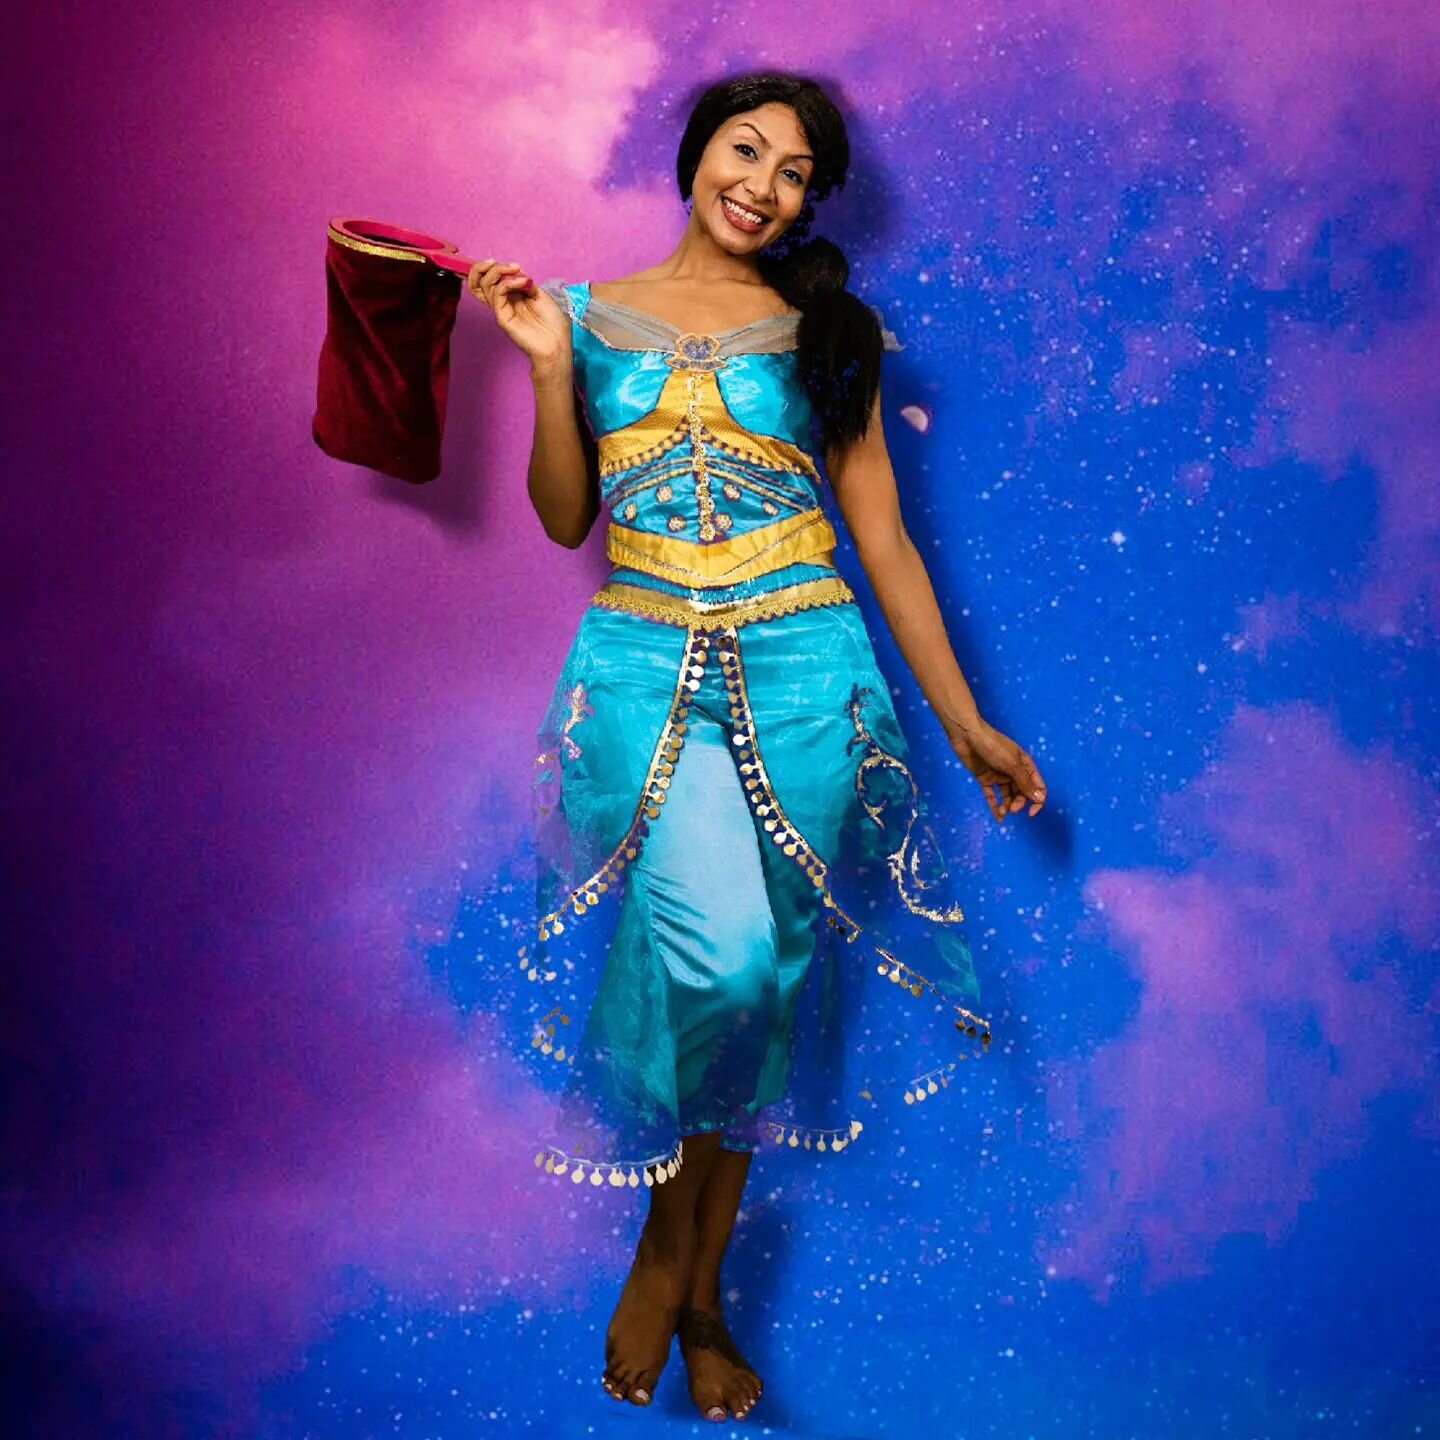 PRINCESS JASMINE 💚💙💜
.
In all of my parties I love to do a little Magic. The absolutely love my making things dissappear in my Magic bag. So much fun! 
.
Don't forget I also offer...
.

Magic, Balloon modelling, Pass the parcel, Bubbles, Dancing w